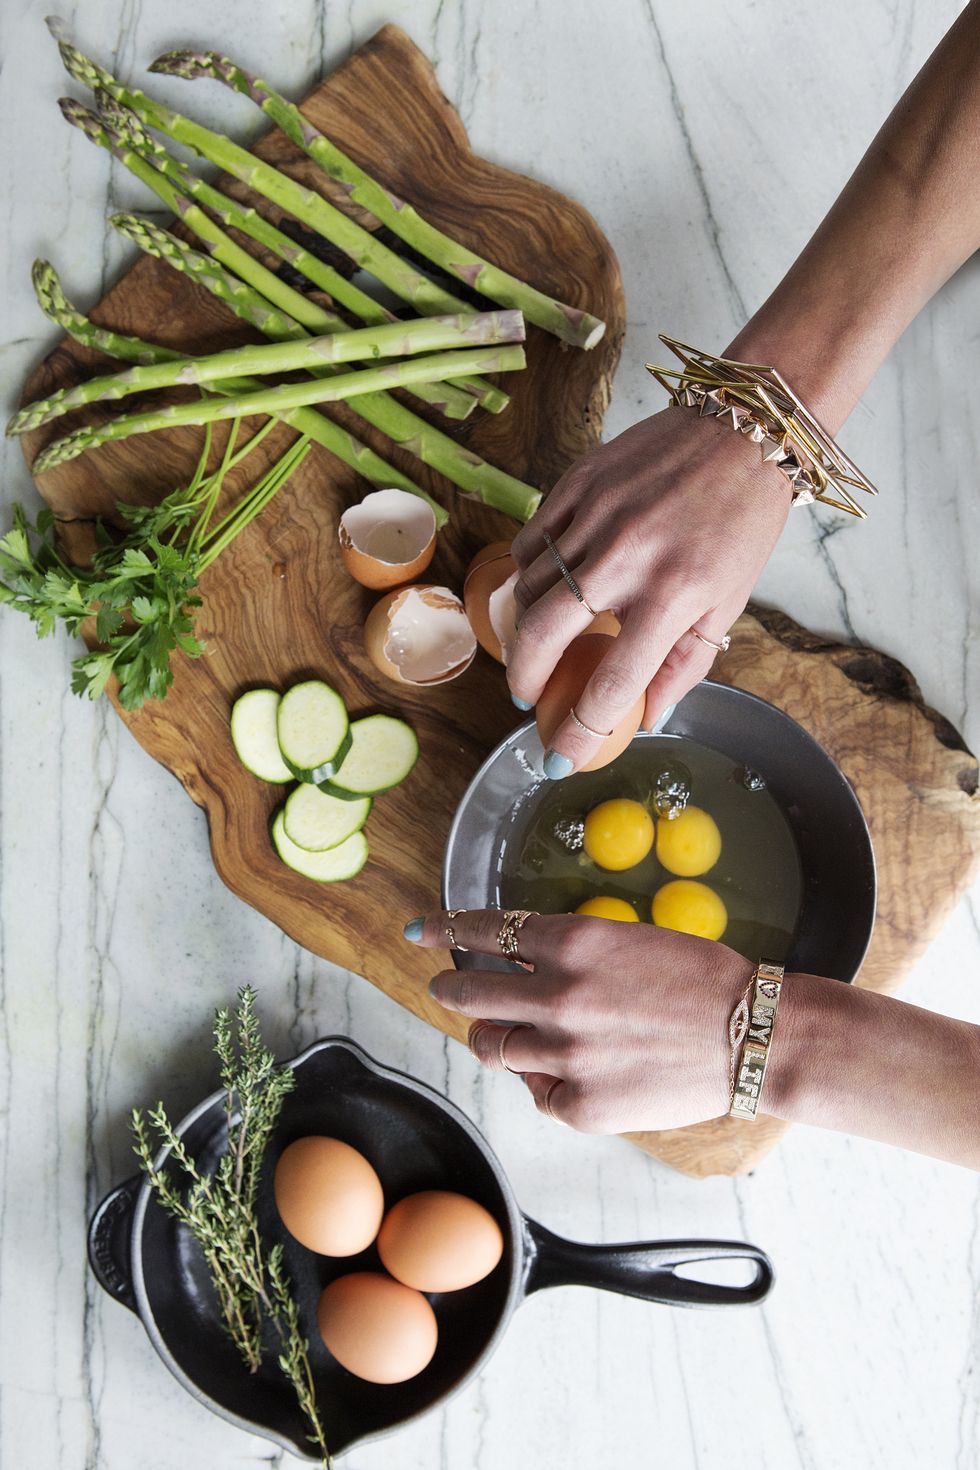 A young woman's hands with jewelry on is breaking eggs into a brown bowl. There are various ingredients for an omelet or frittata. An overhead shot on a marble background.